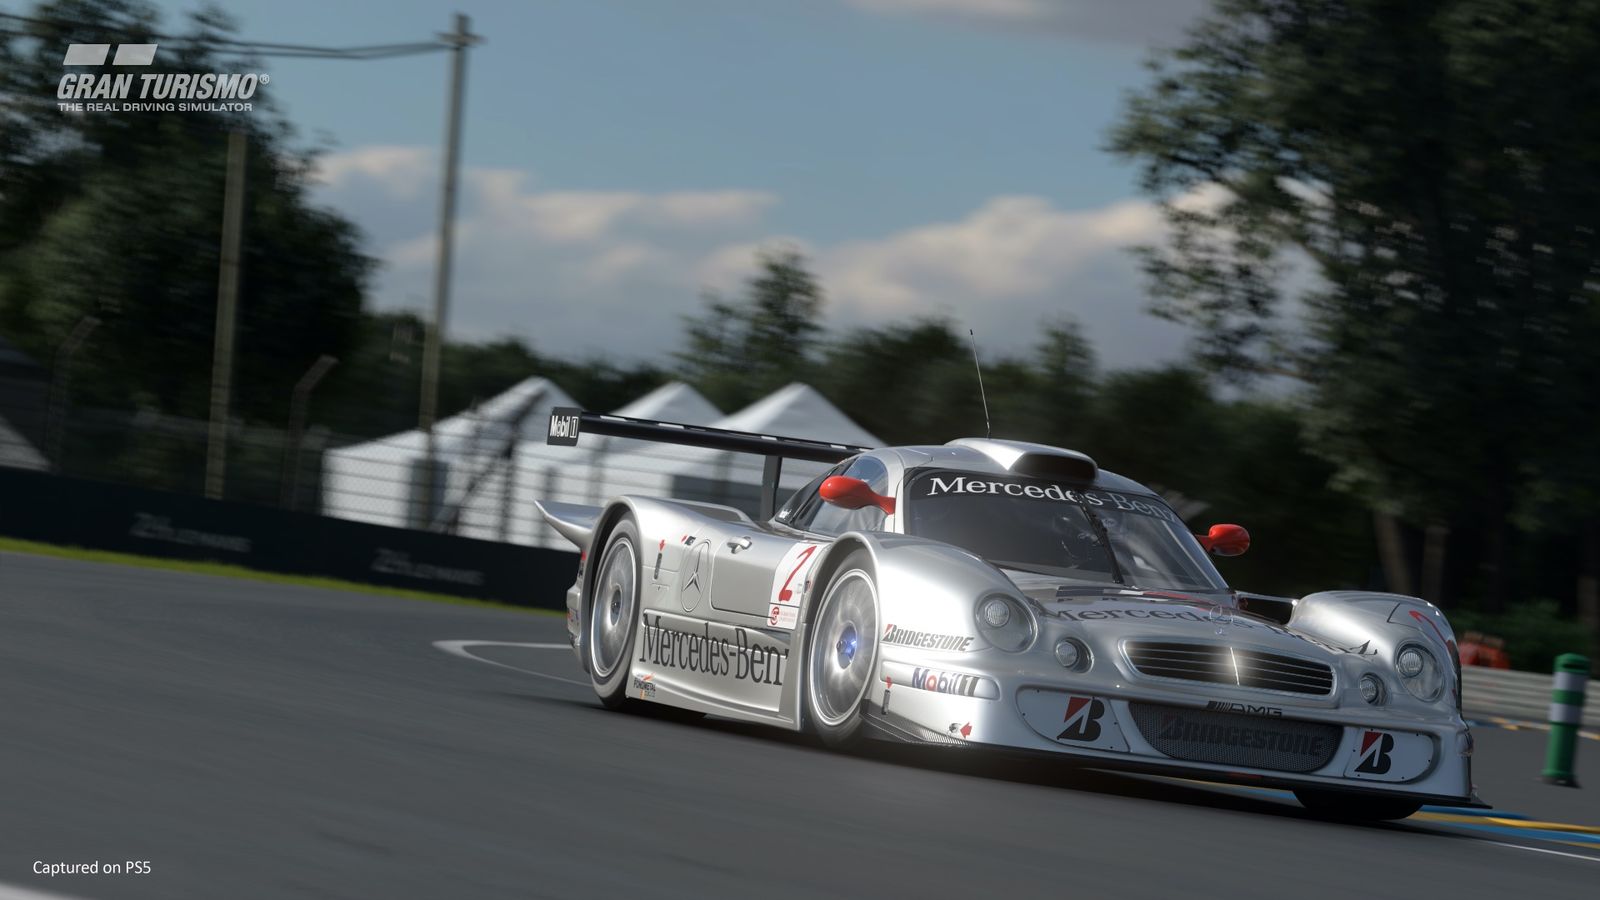 Image of a sports Mercedes on a track in Gran Turismo 7.